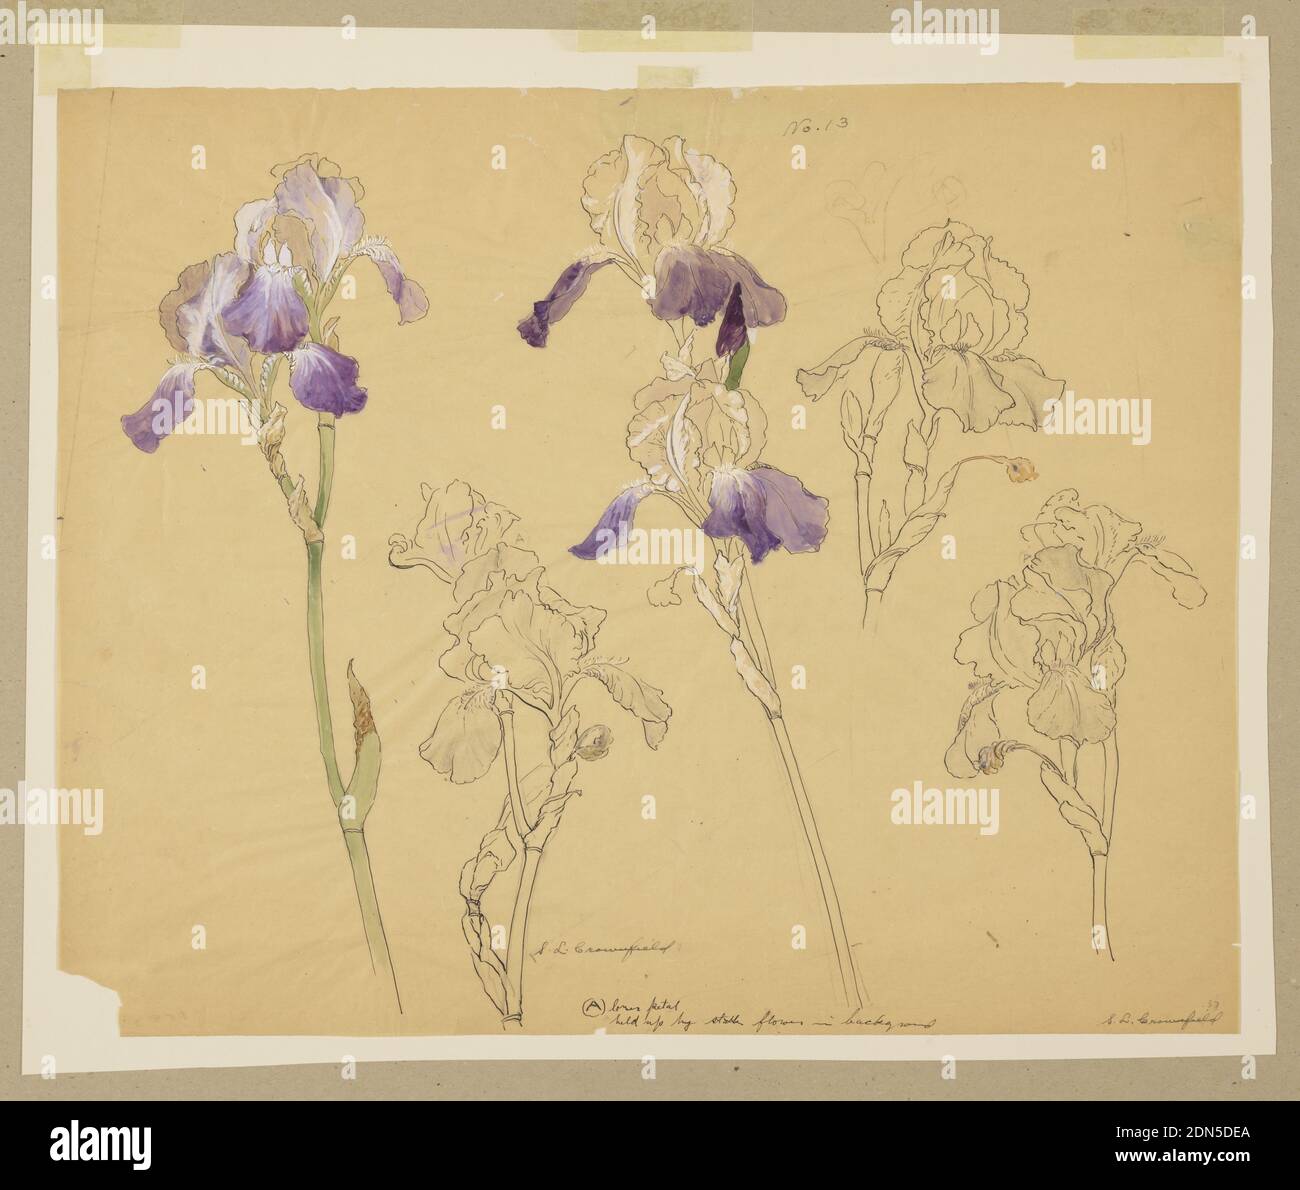 Study of Irises, Sophia L. Crownfield, (American, 1862–1929), Pen and ink, graphite and watercolor on yellow tracing paper, Horizontal sheet illustrating four sprays of irses, three of which are partially colored with white, yellow, green and violet watercolor., USA, early 20th century, nature studies, Drawing Stock Photo